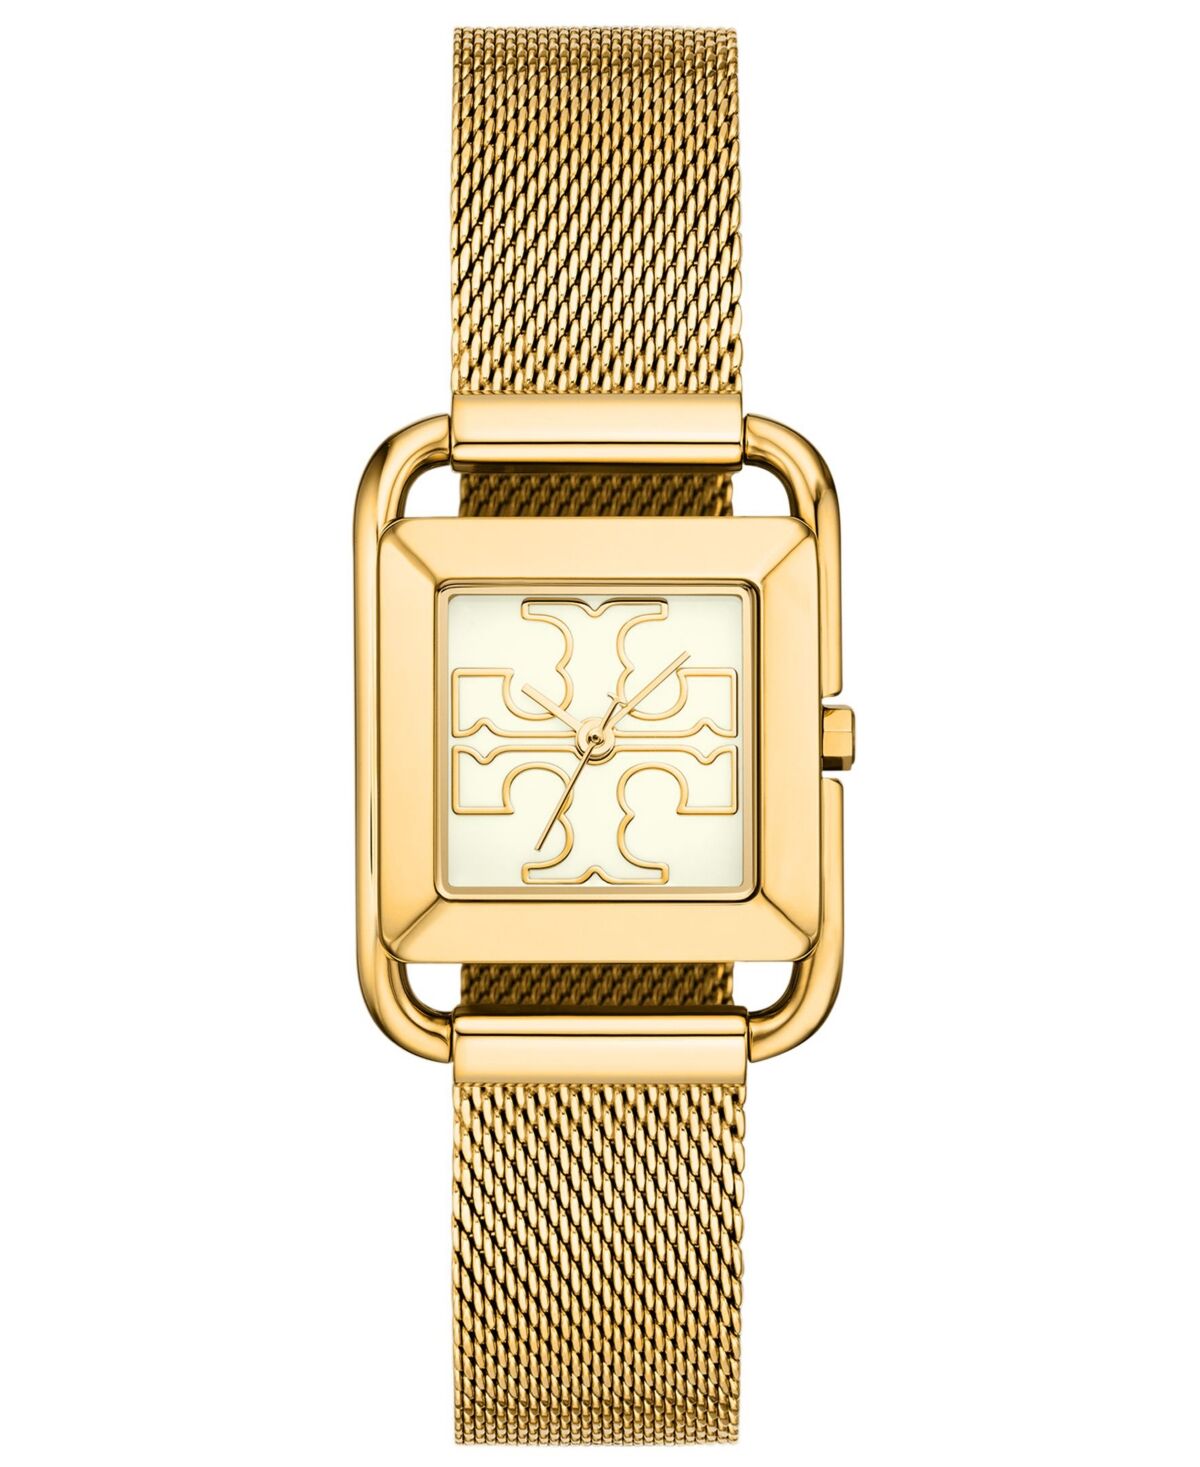 Tory Burch Women's The Miller Square Gold-Tone Stainless Steel Mesh Bracelet Watch 24mm - Gold